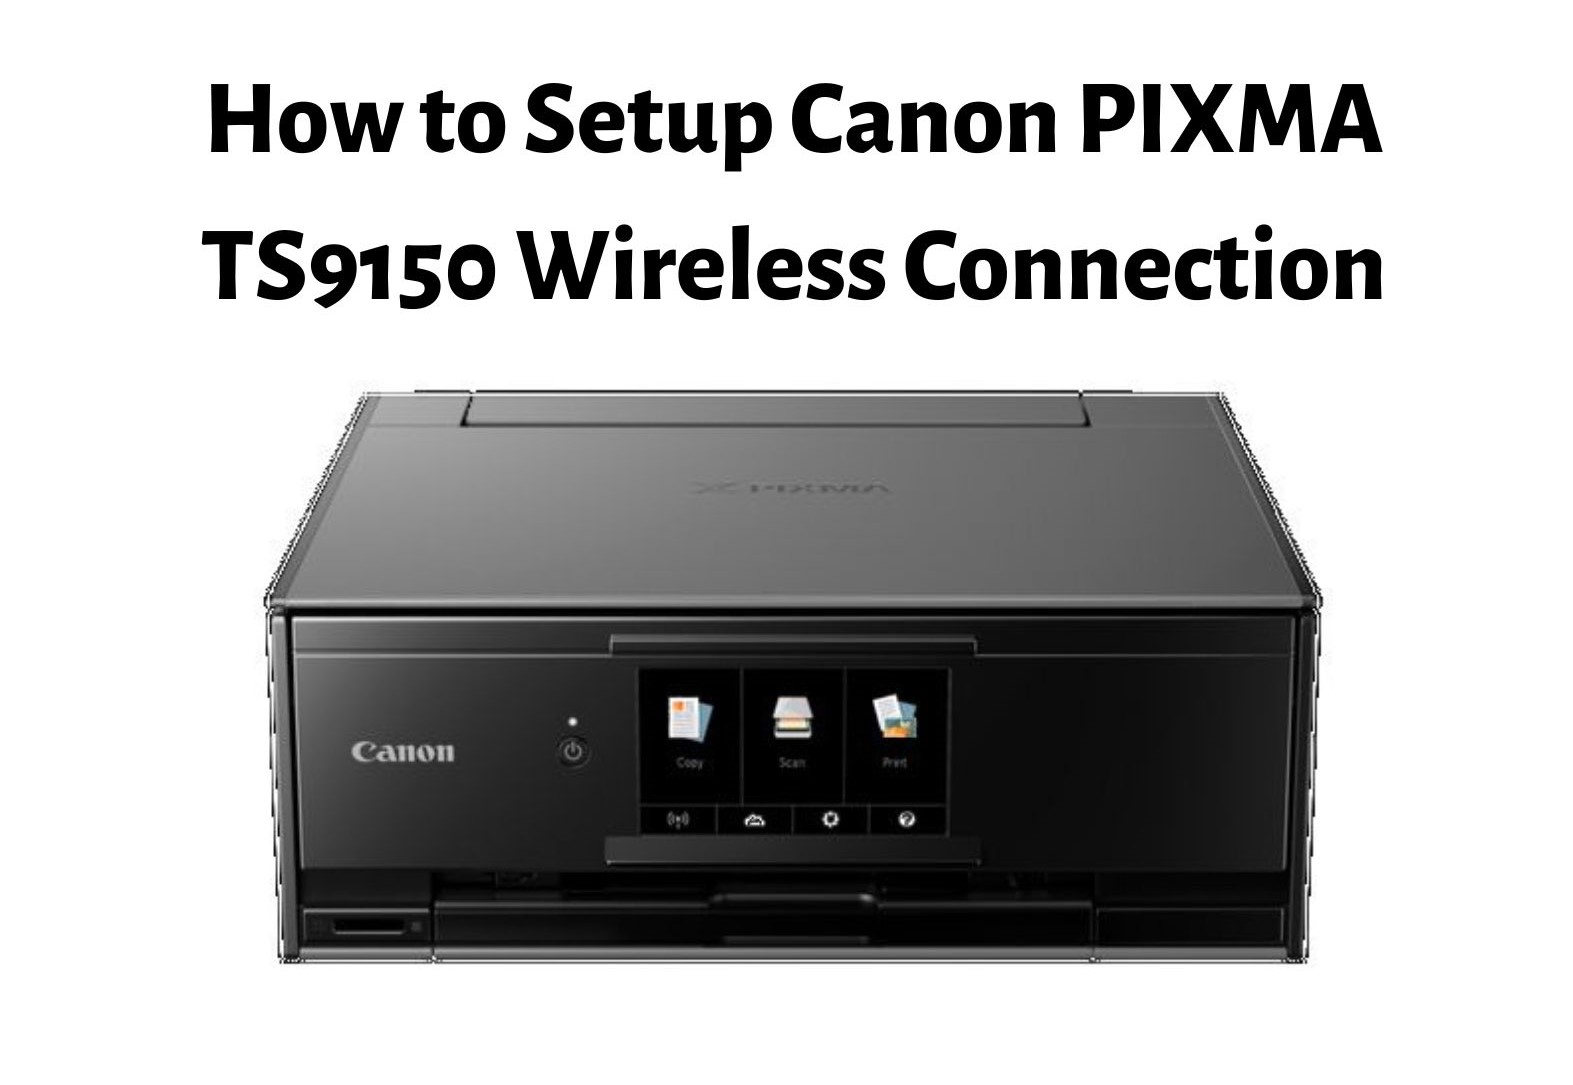 How to Setup Canon PIXMA TS9150 Wireless Connection